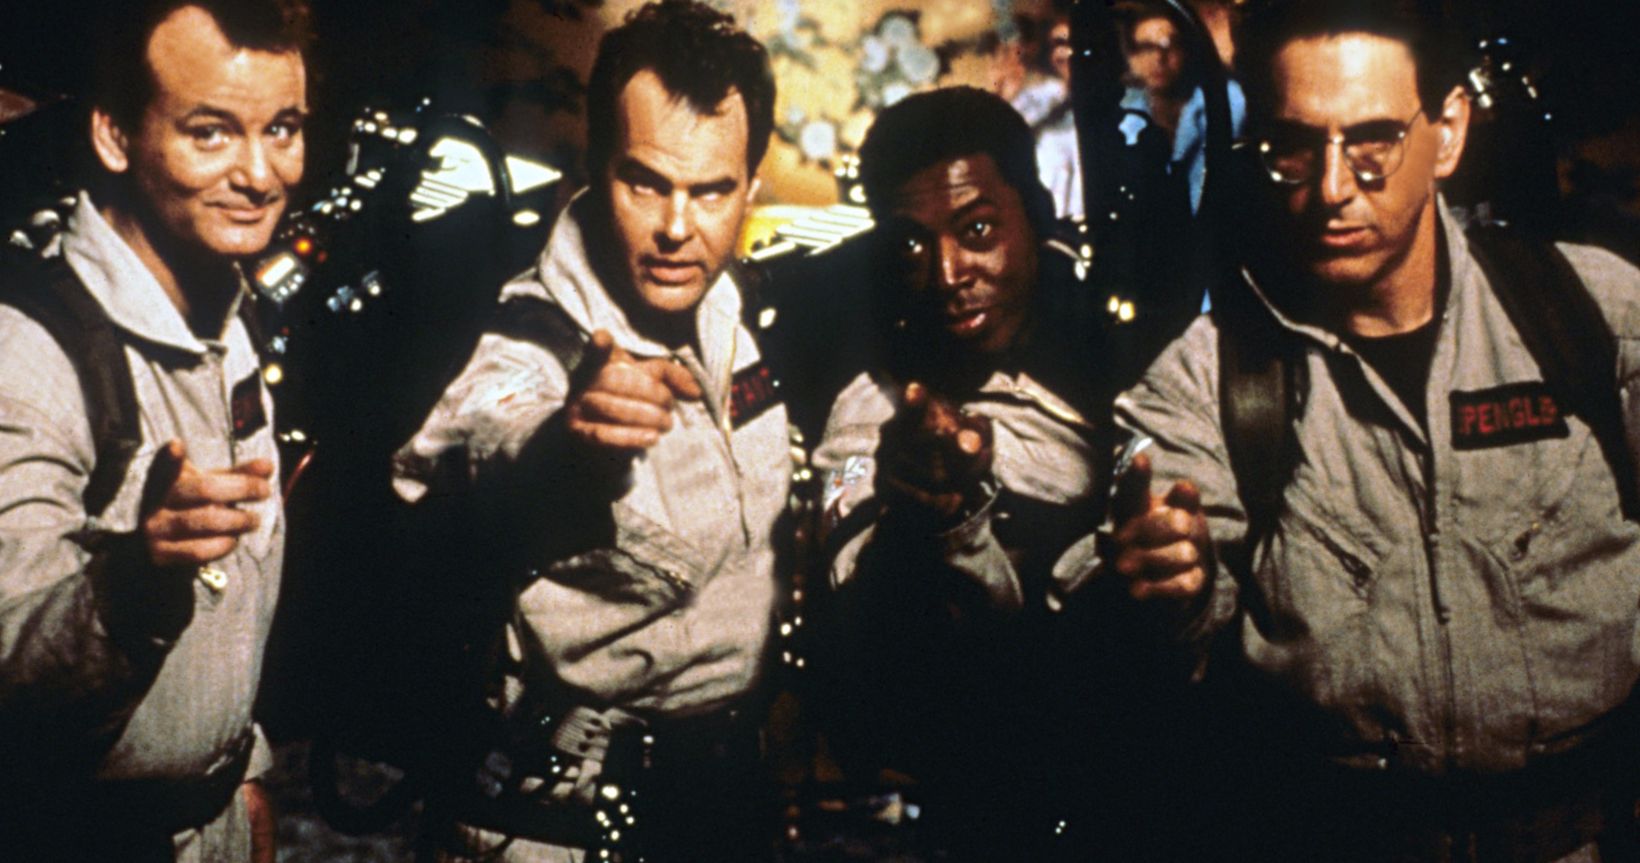 Original Ghostbusters Cast Has Read Ghostbusters 3 Script: Are They in or Out?